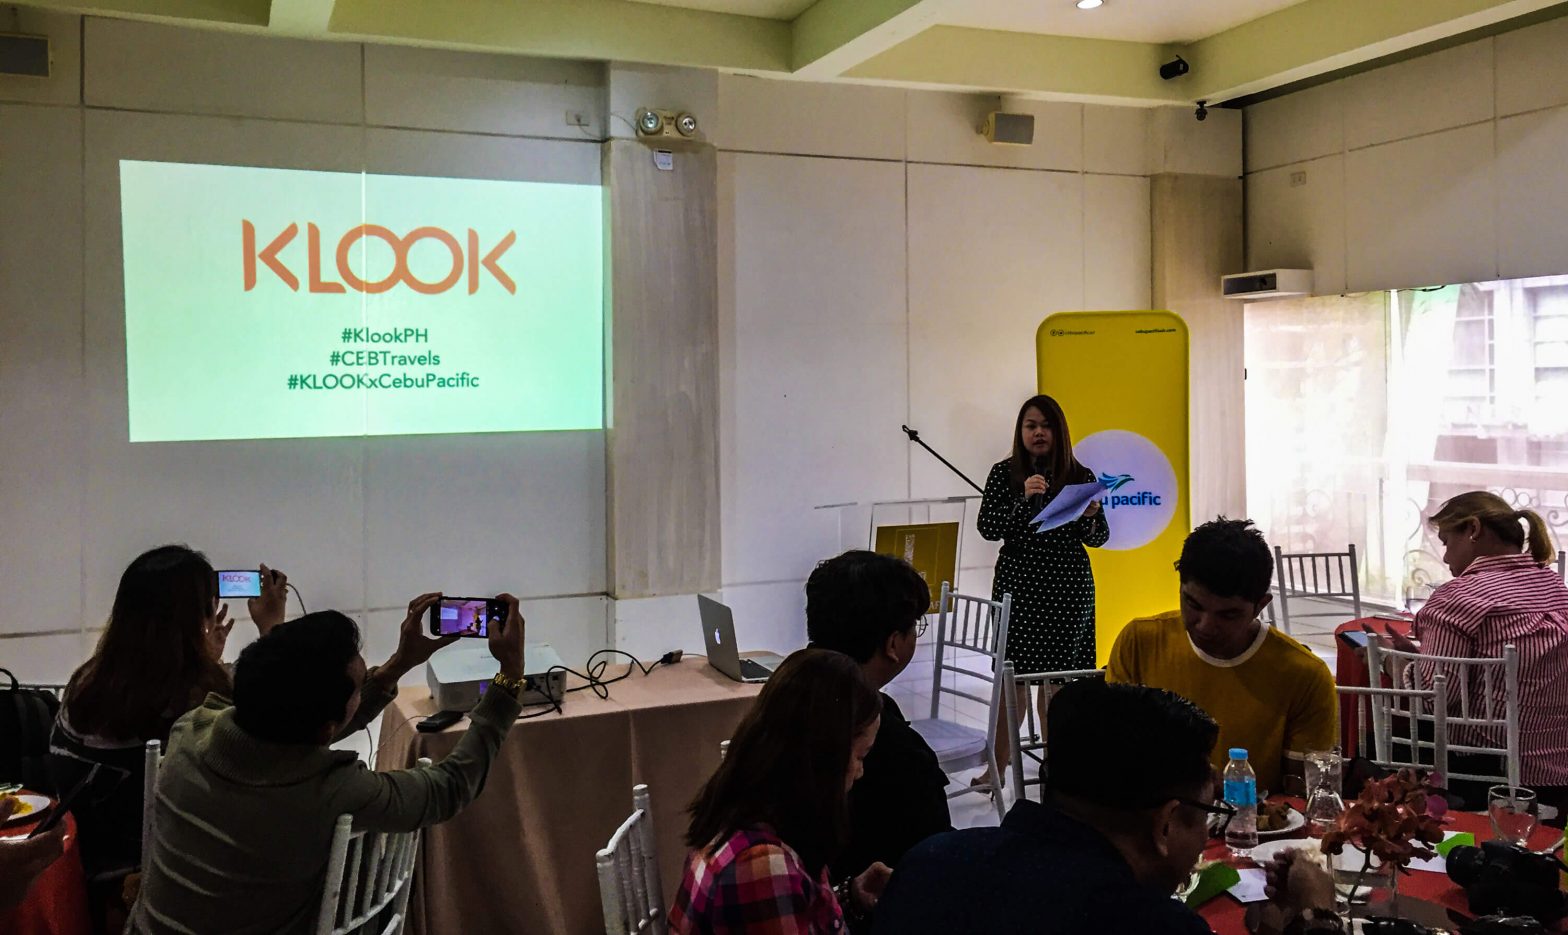 Top deals on tours, experiences, airfare in Cebu leg of Klook Travel Fest 2019